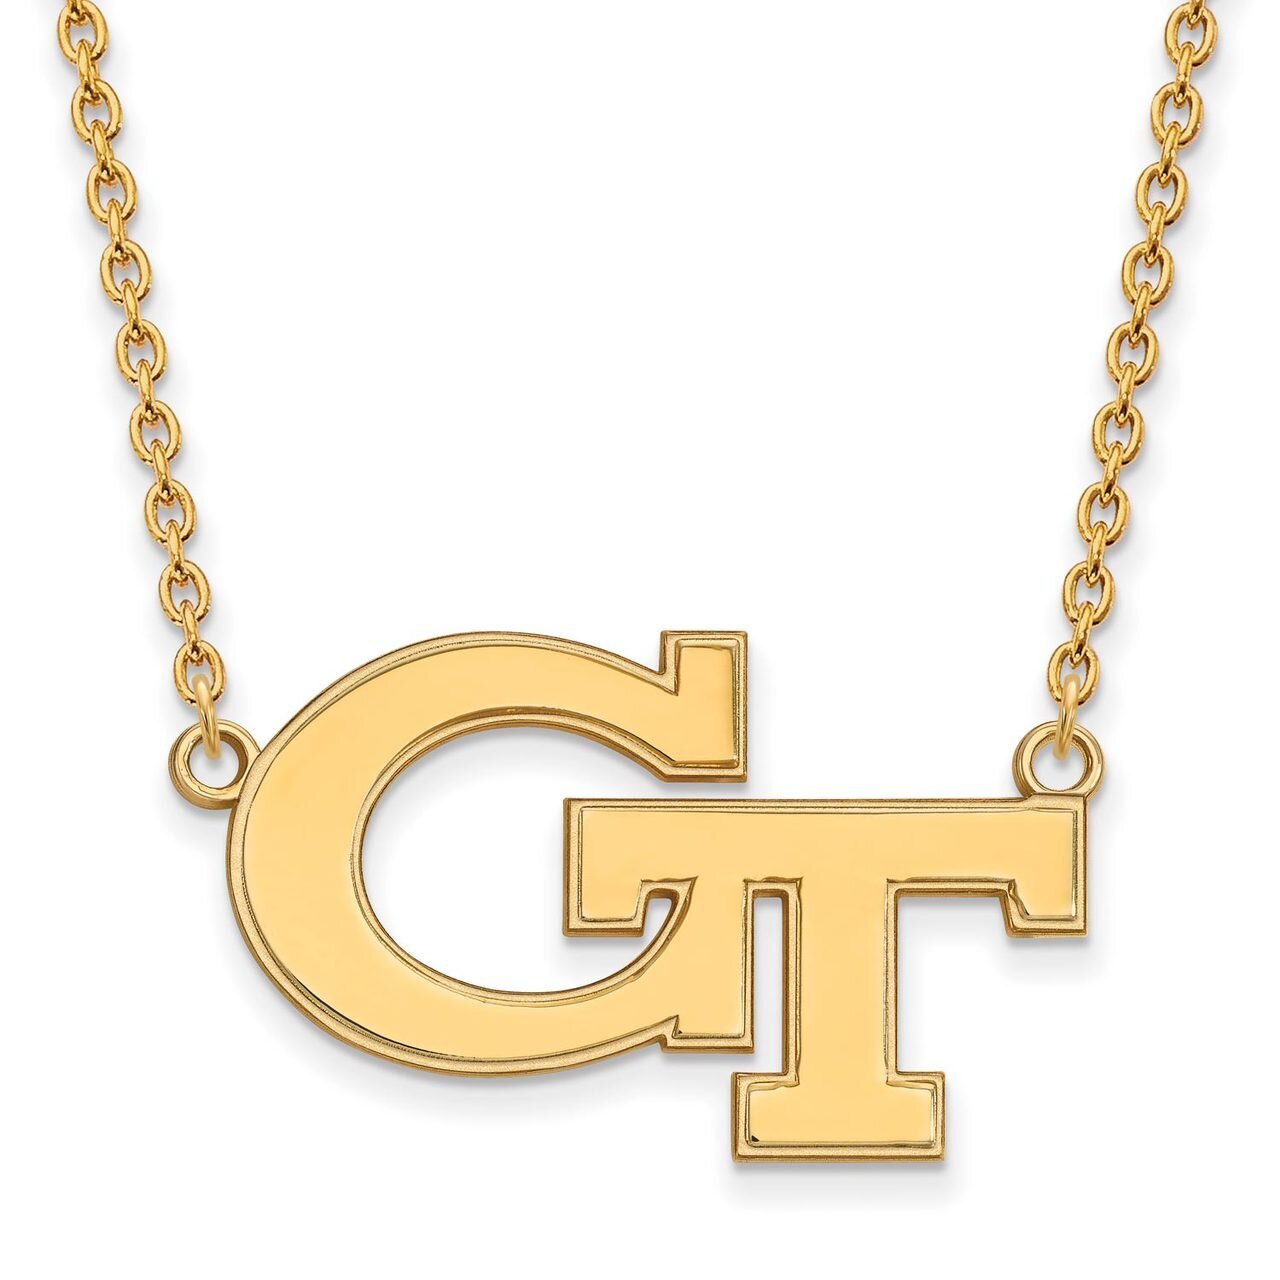 Georgia Institute of Technology Large Pendant with Chain Necklace 10k Yellow Gold 1Y010GT-18